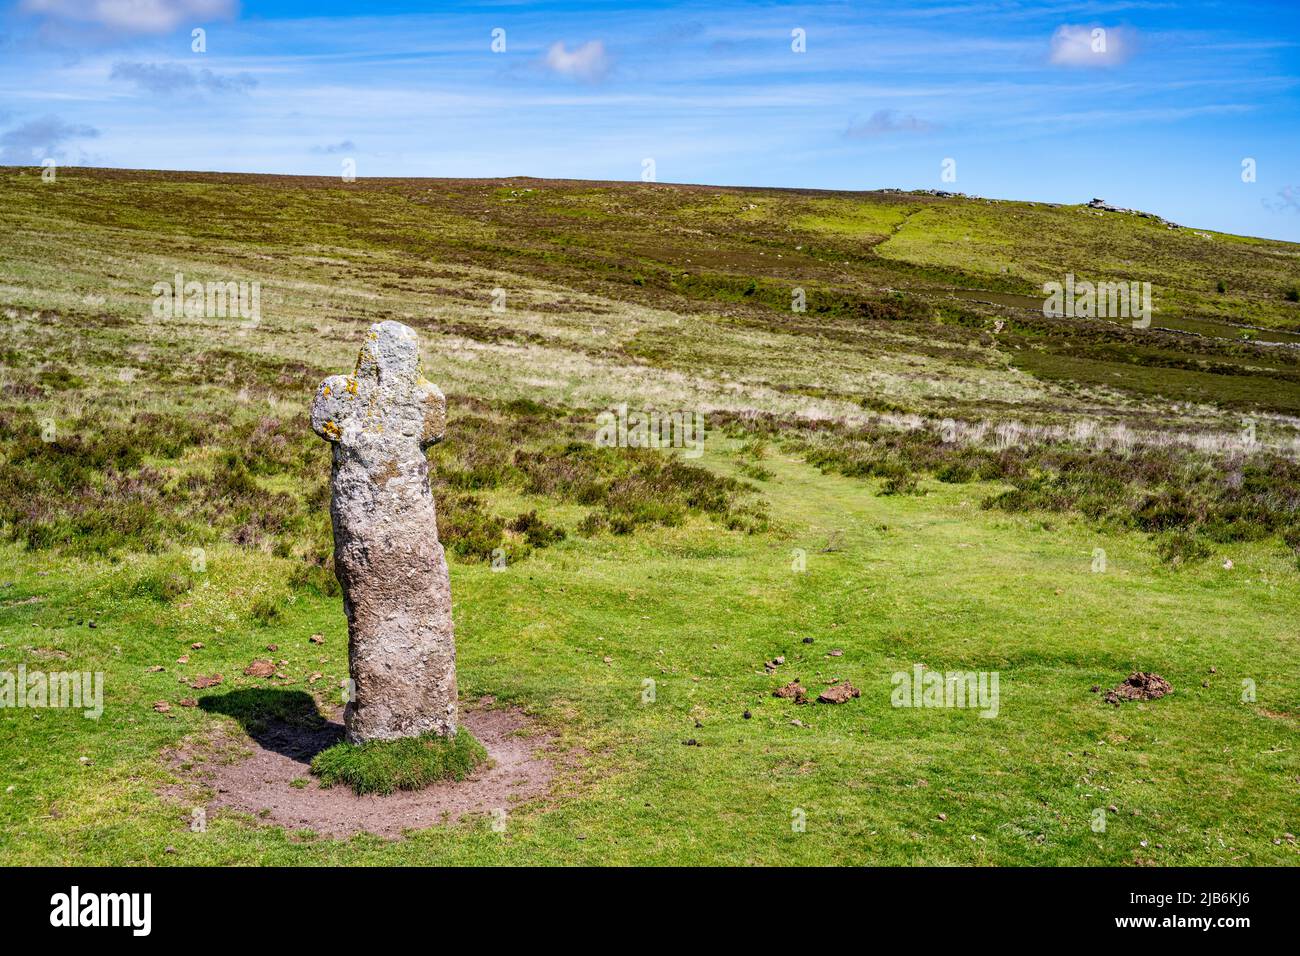 Bennett's Cross is one of a number of ancient stone crosses erected as navigation aids on remote moorland routes. Stock Photo